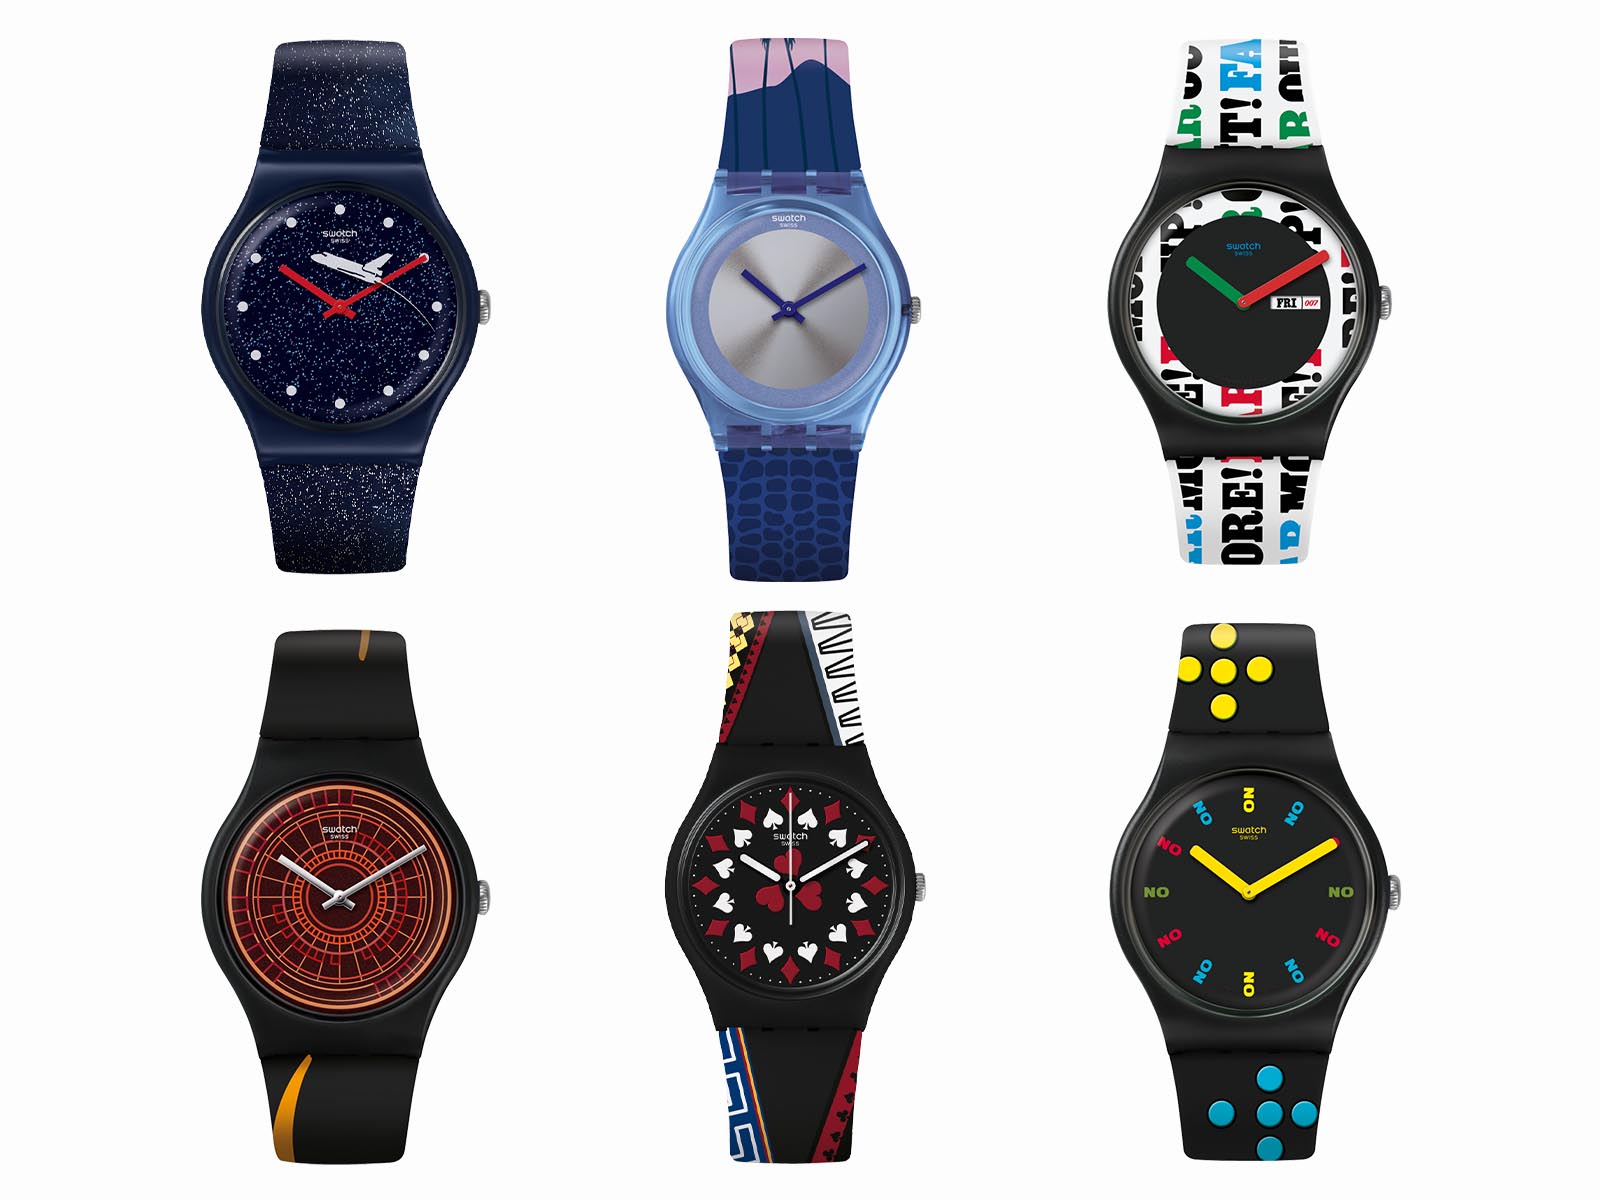 007 watches collection